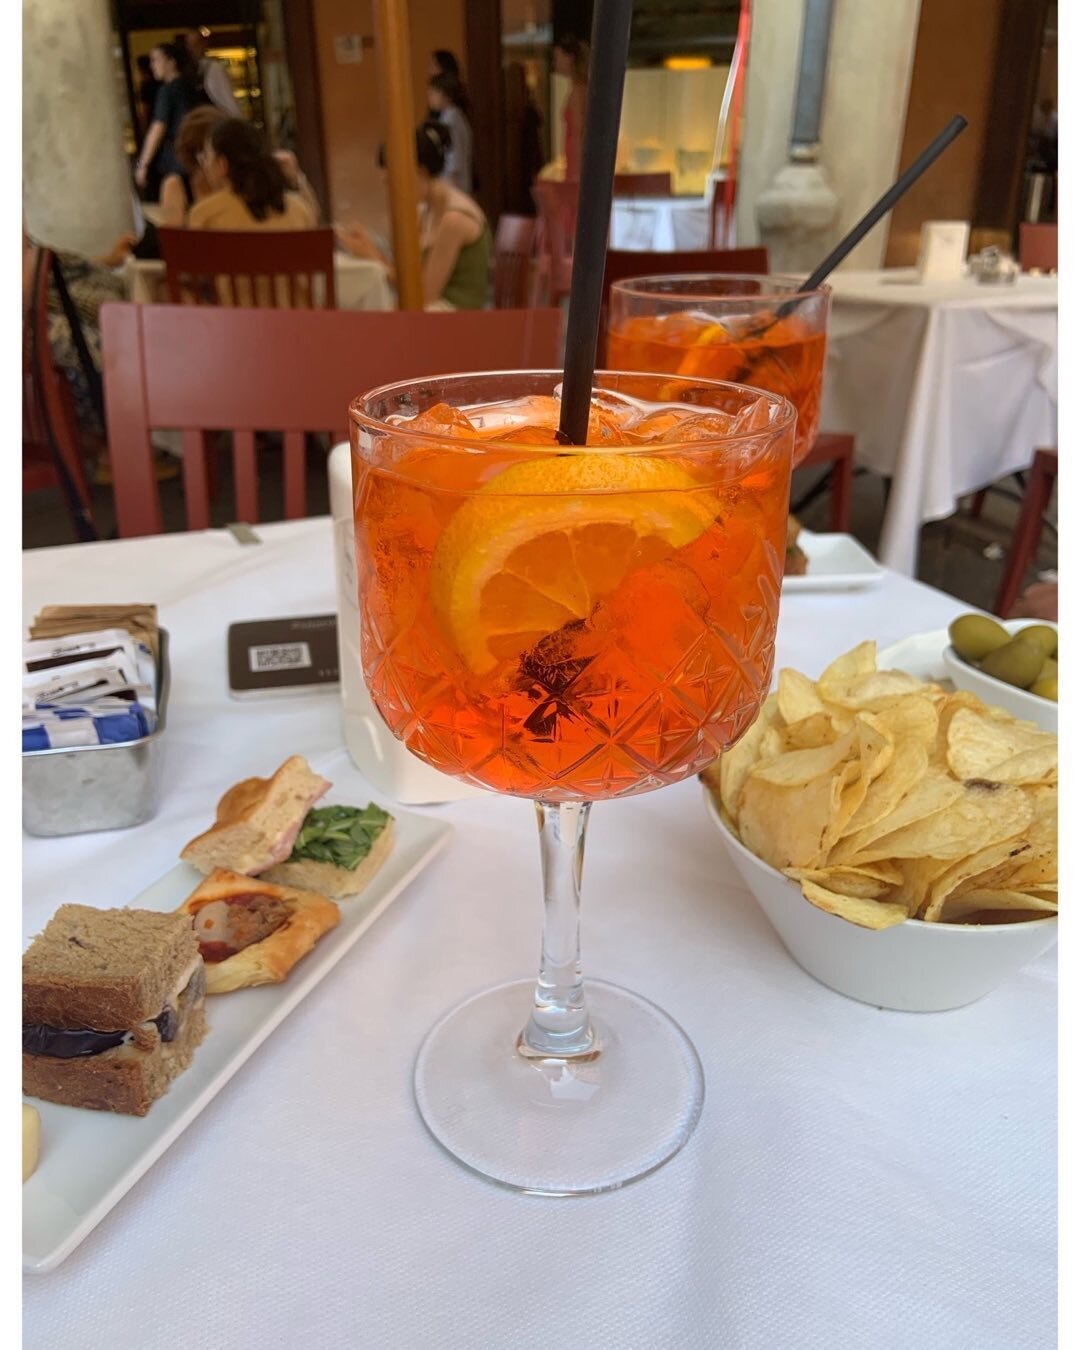 Our favourite Italian ritual&hellip; aperitivi time, especially with an Aperol spritz!

#aperitivi  #lemarche #italy #aperol #italianlifestyle #familybusiness olivegroves #smallvineyards